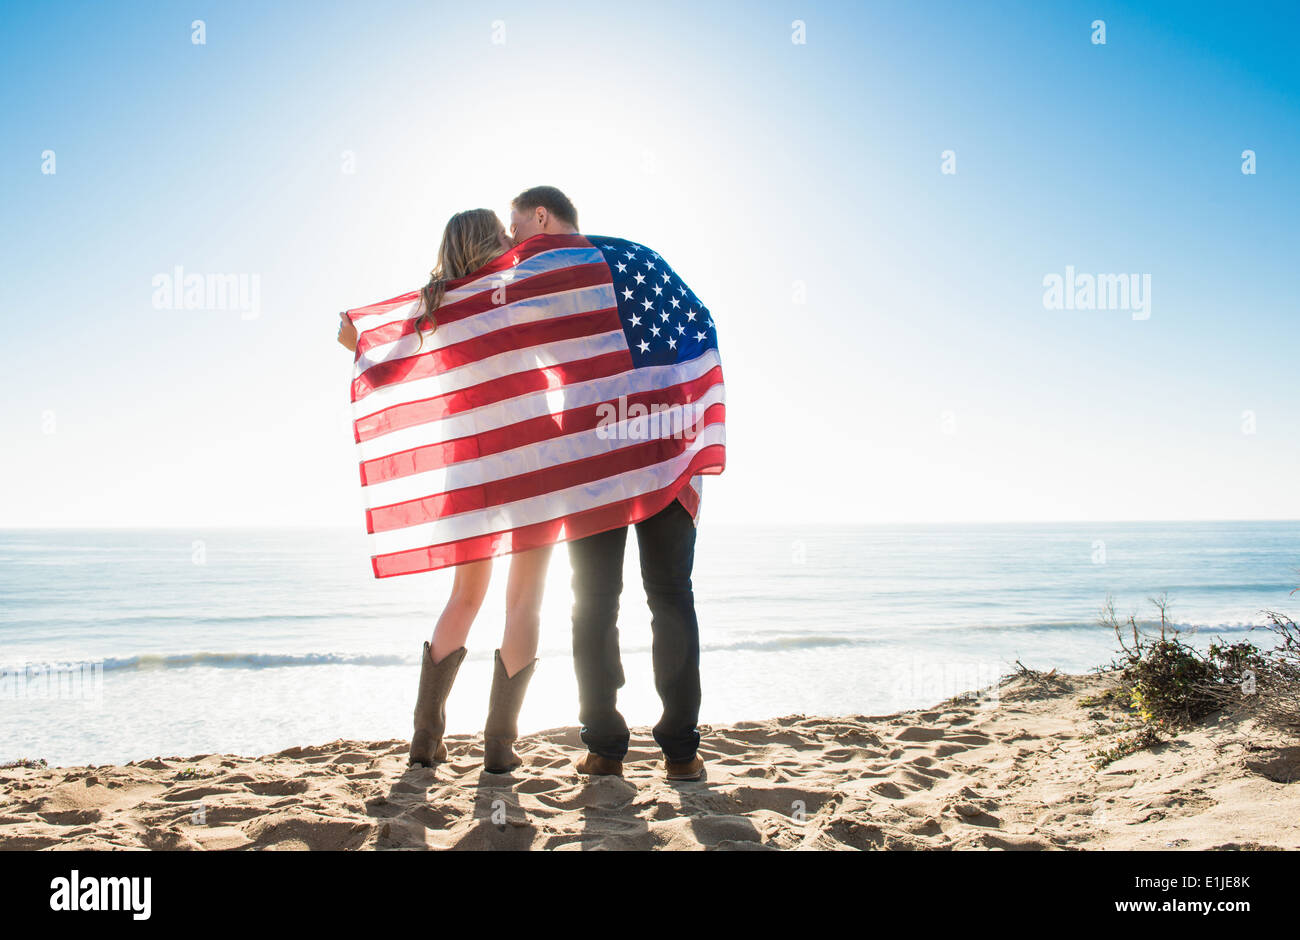 Romantic young couple wrapped in american flag, Torrey Pines, San Diego, California, USA Stock Photo